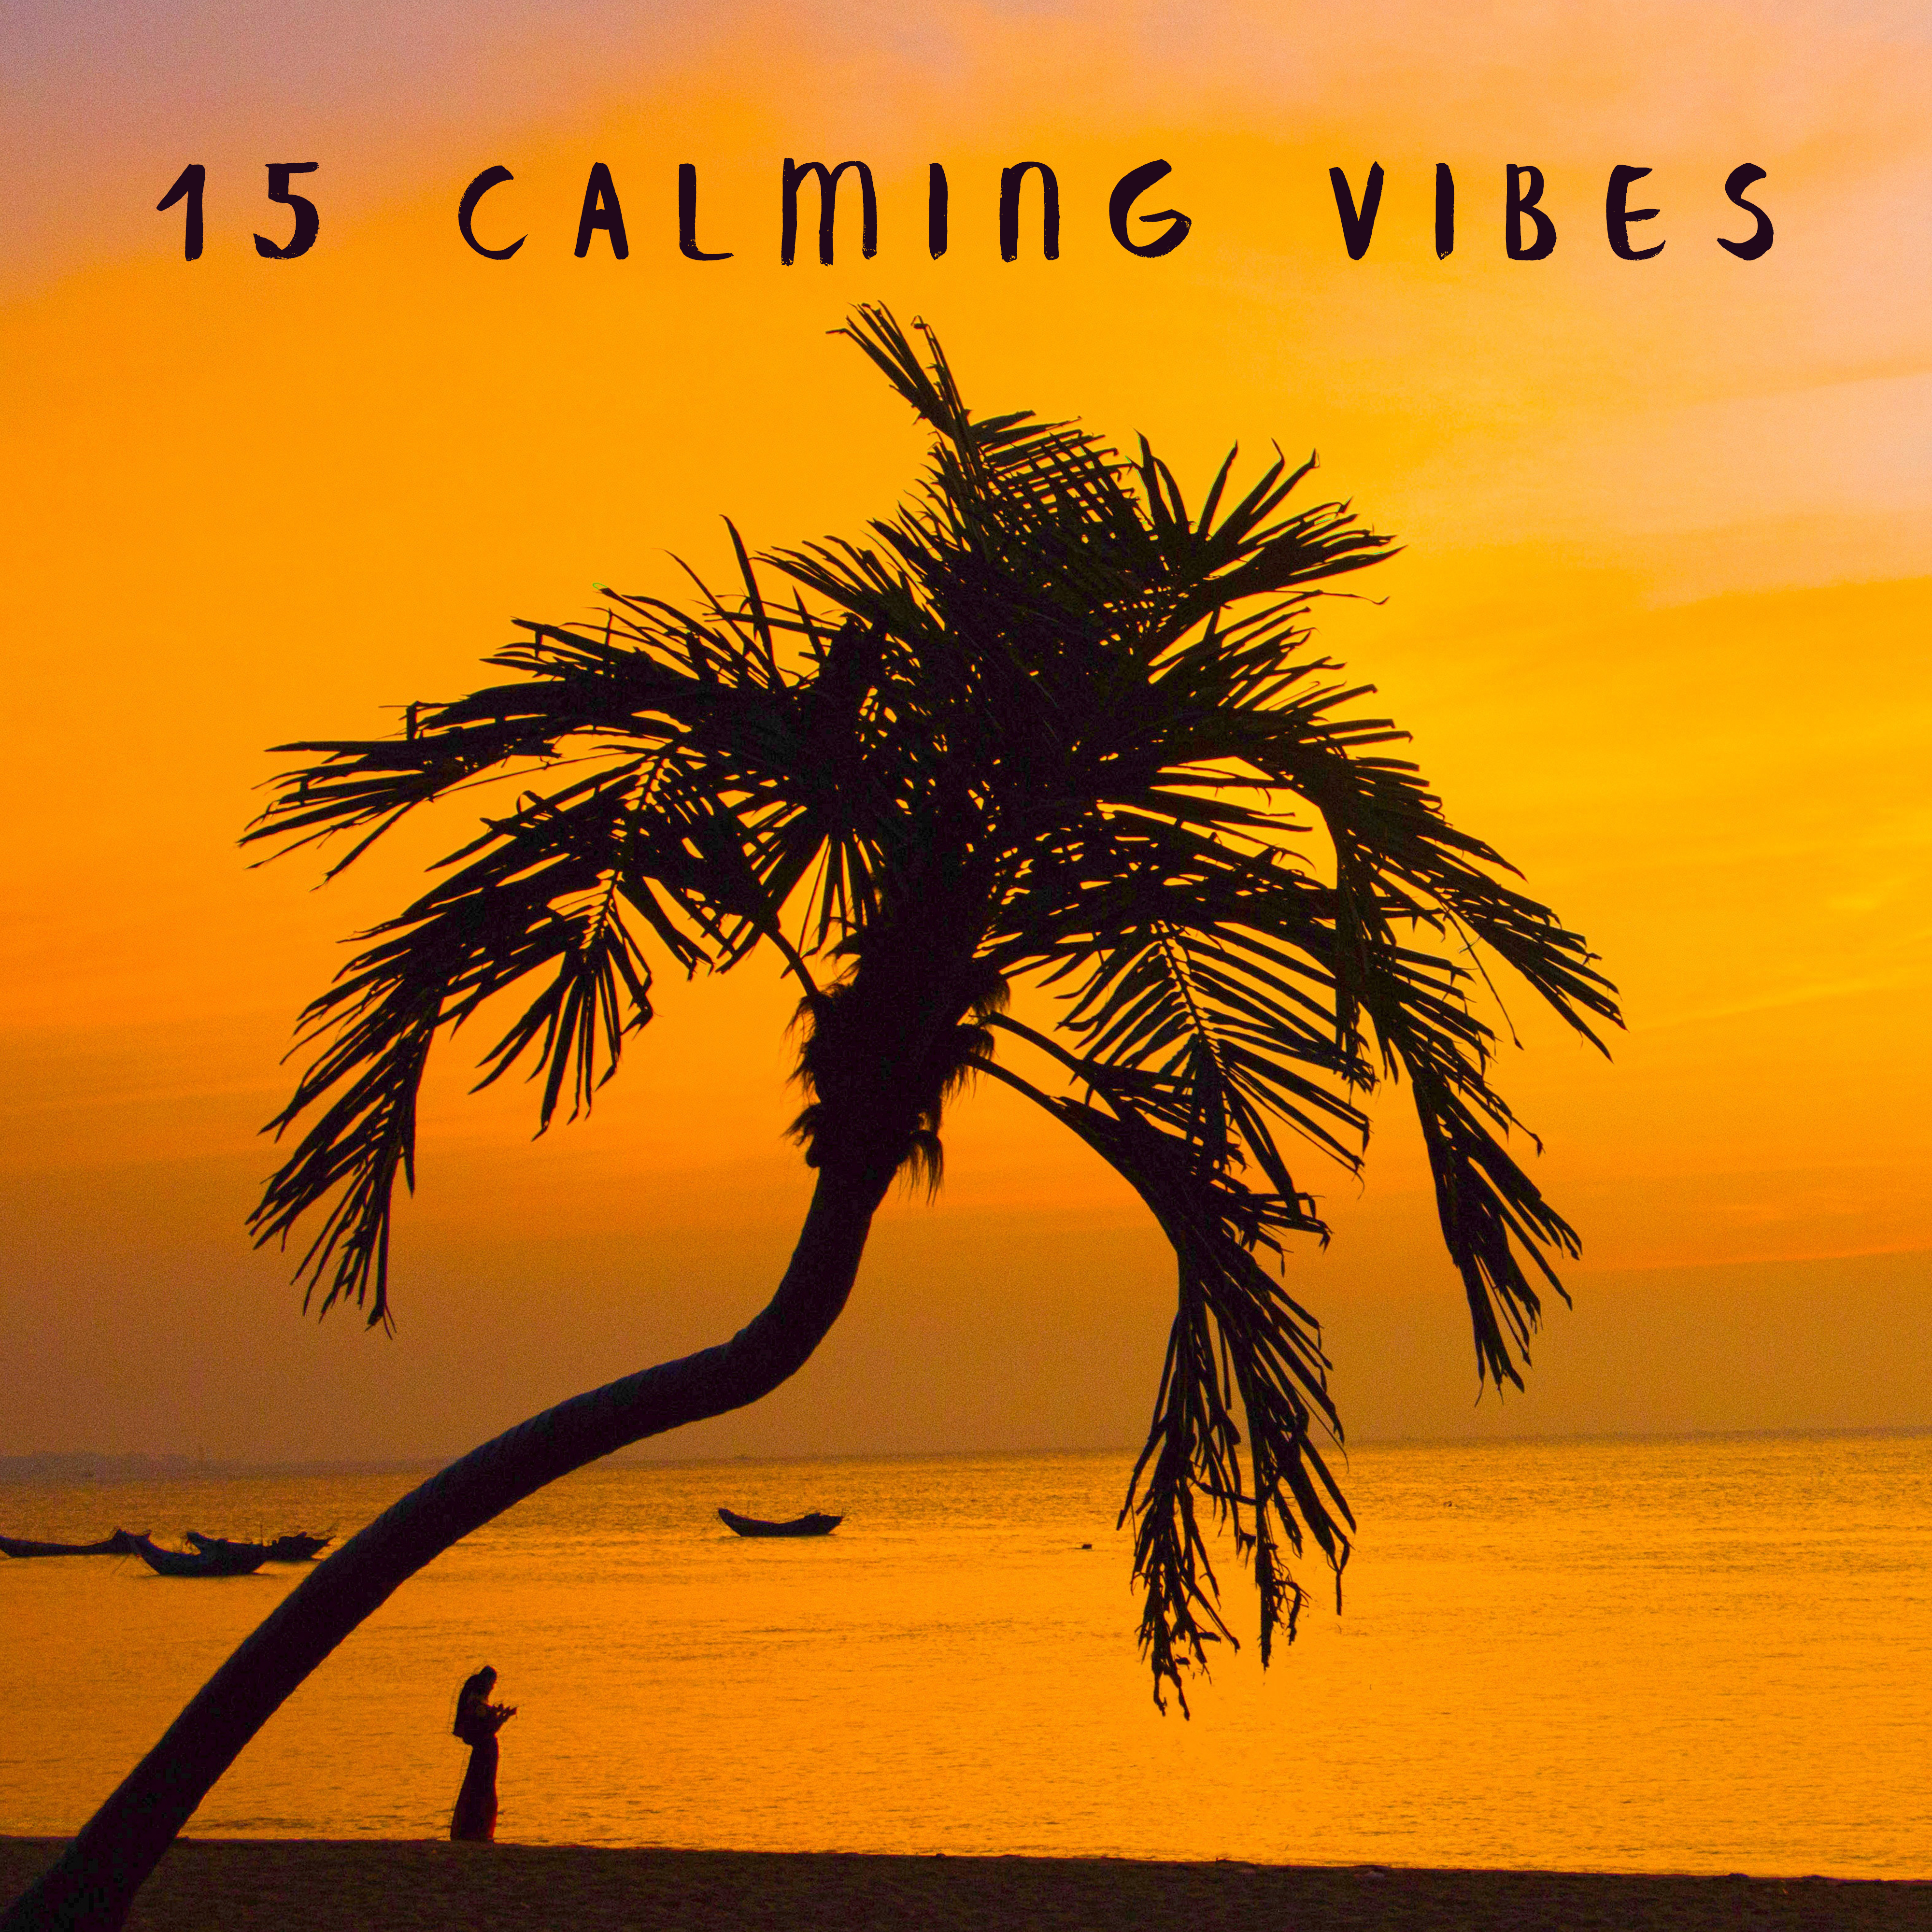 15 Calming Vibes